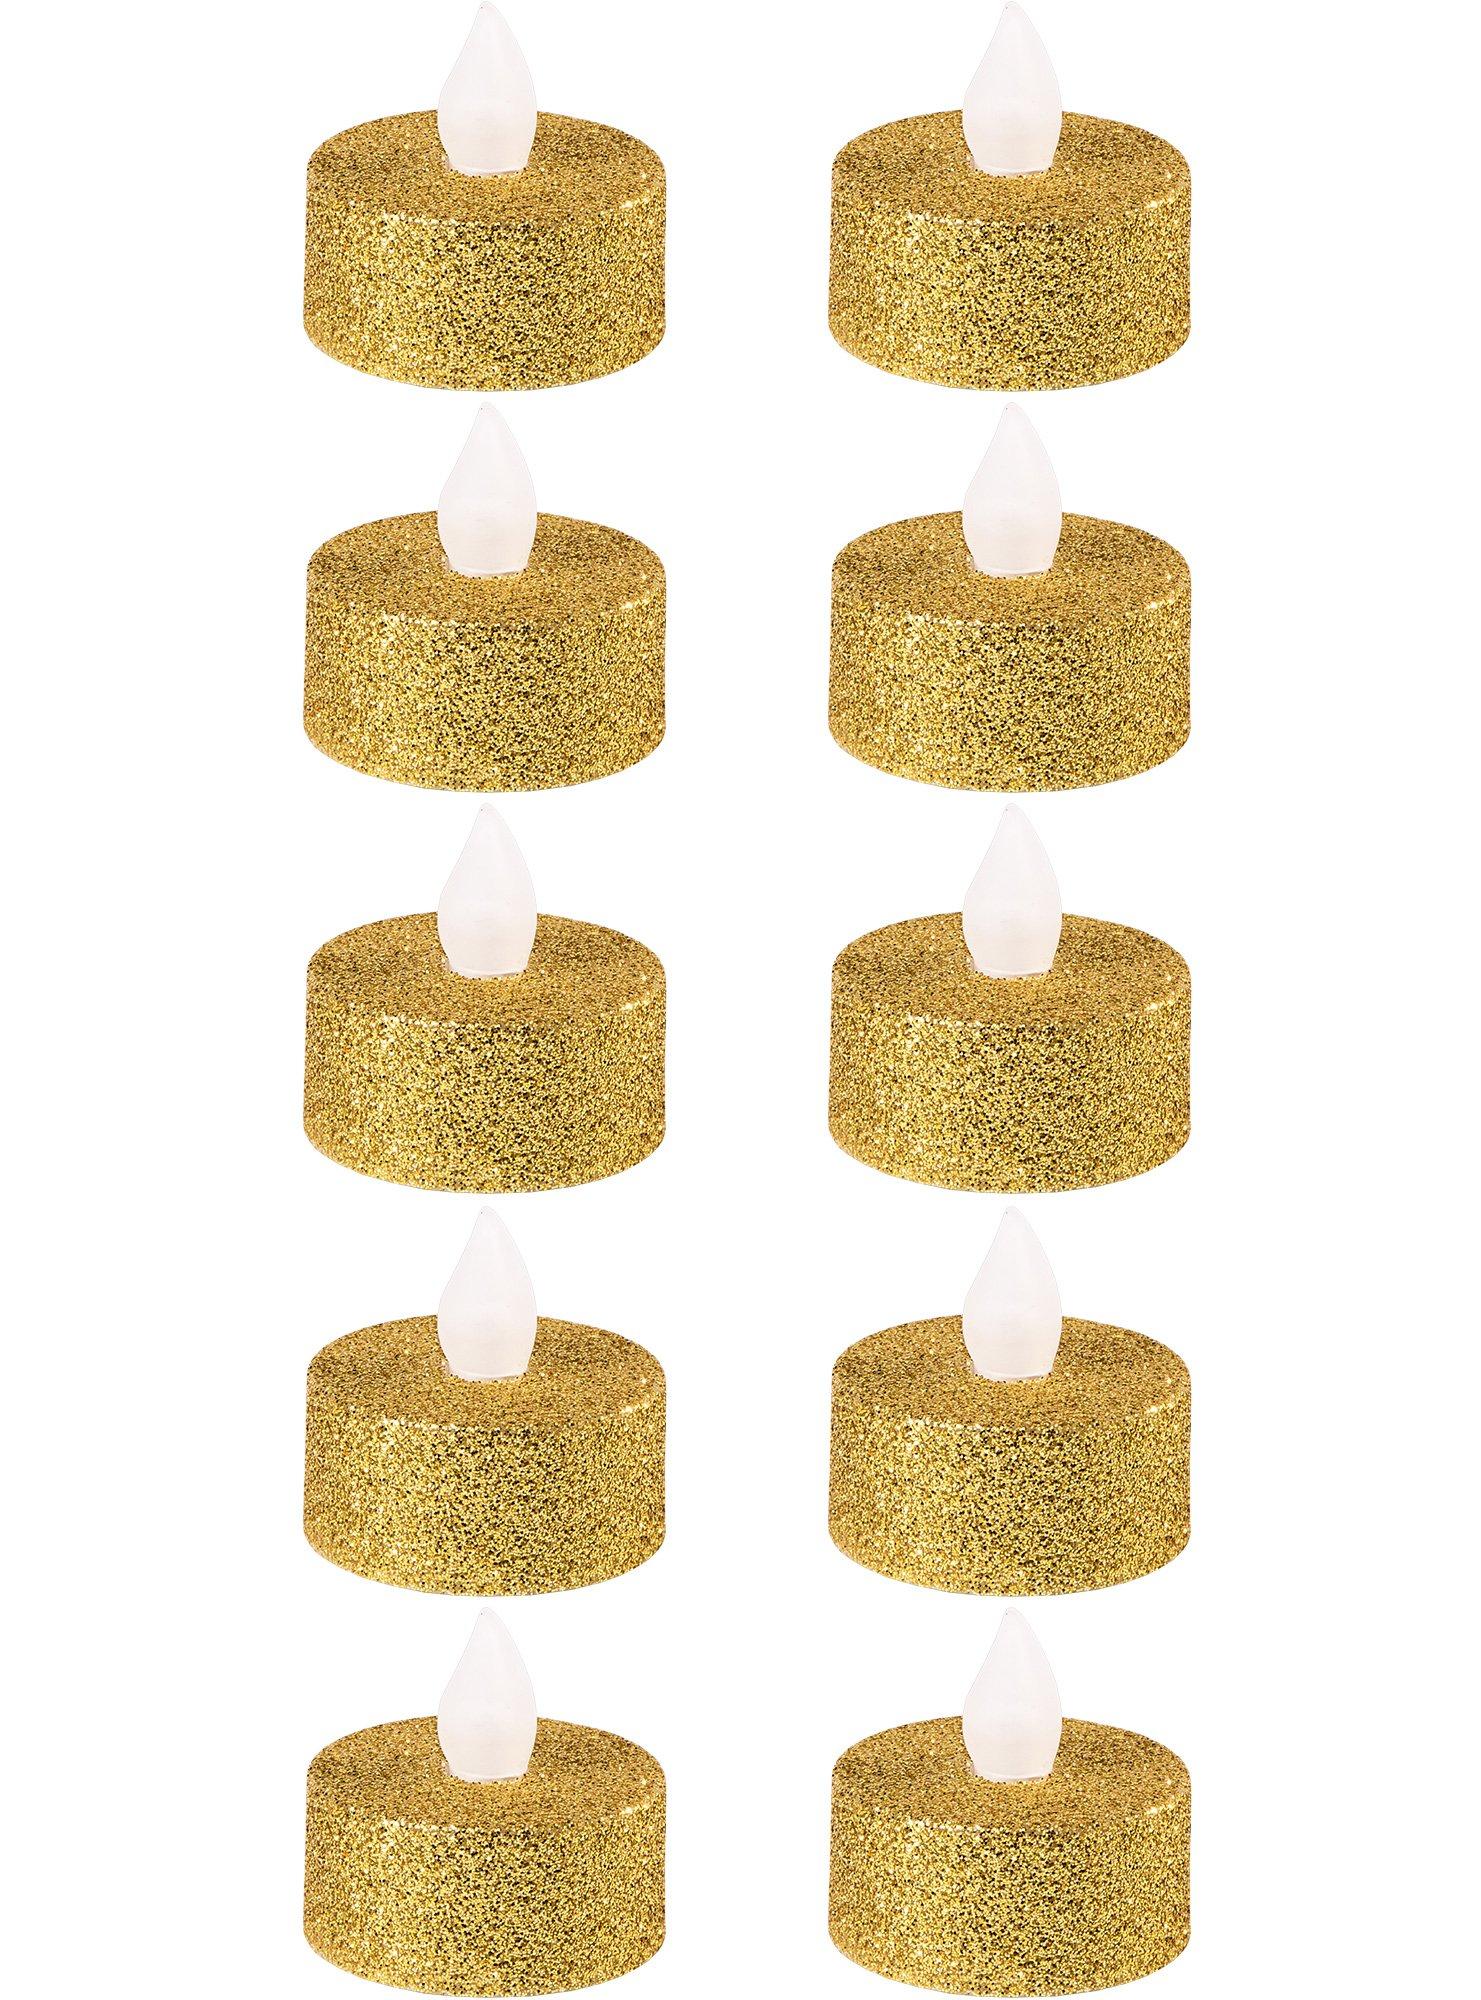 Glitter Gold Tealight Flameless LED Candles 10ct